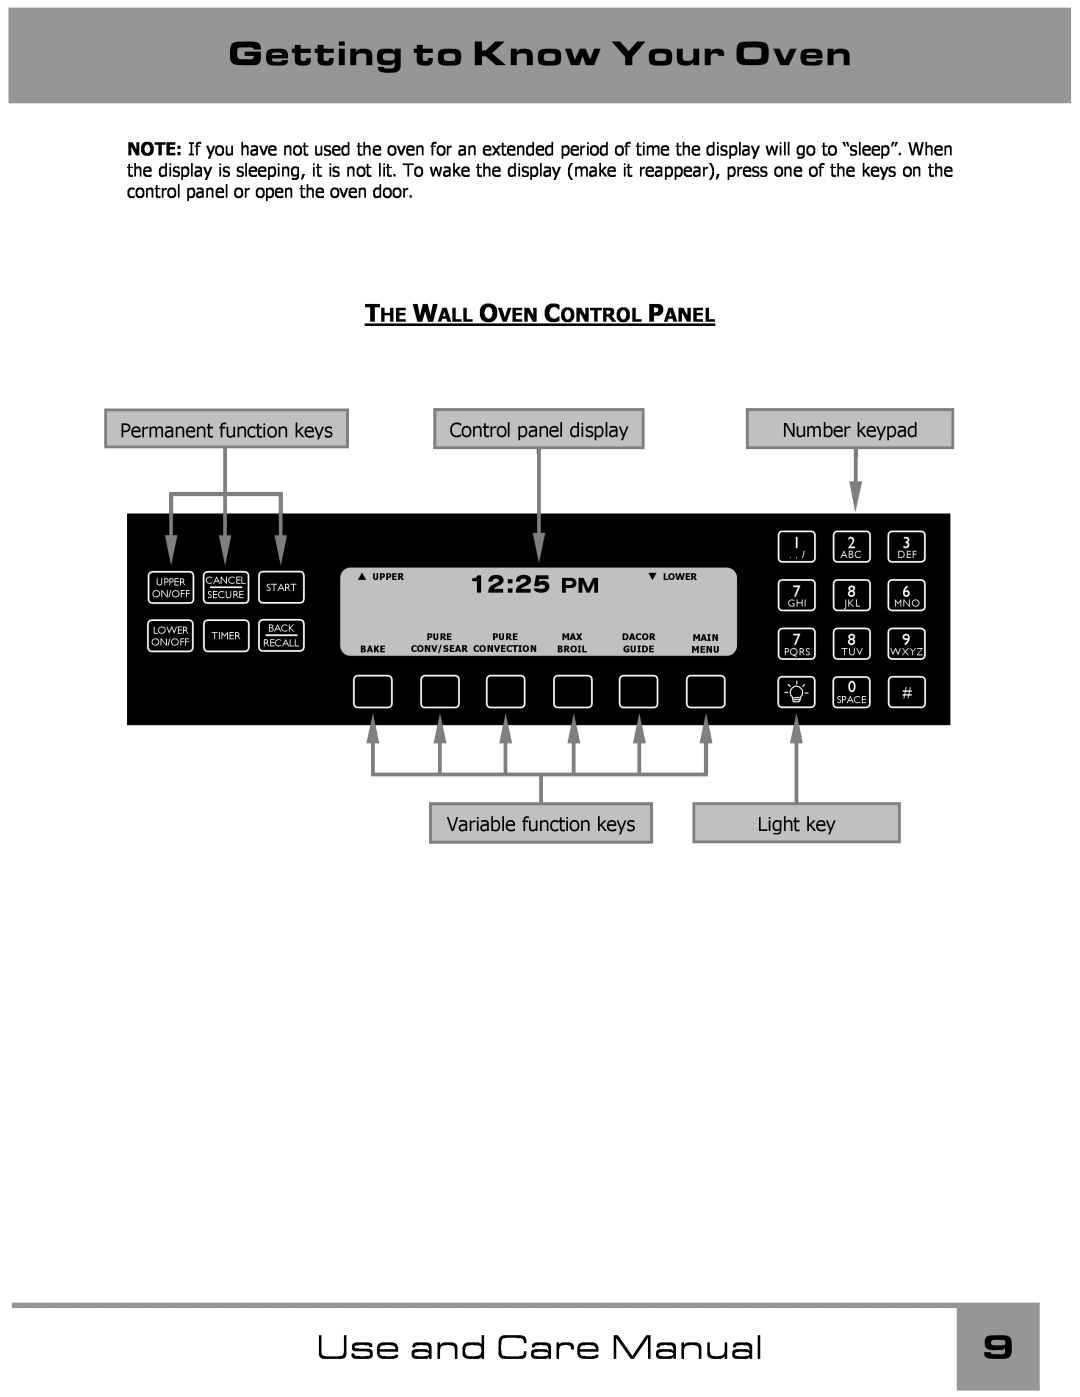 Dacor manual 1225, The Wall Oven Control Panel, Getting to Know Your Oven, Use and Care Manual 